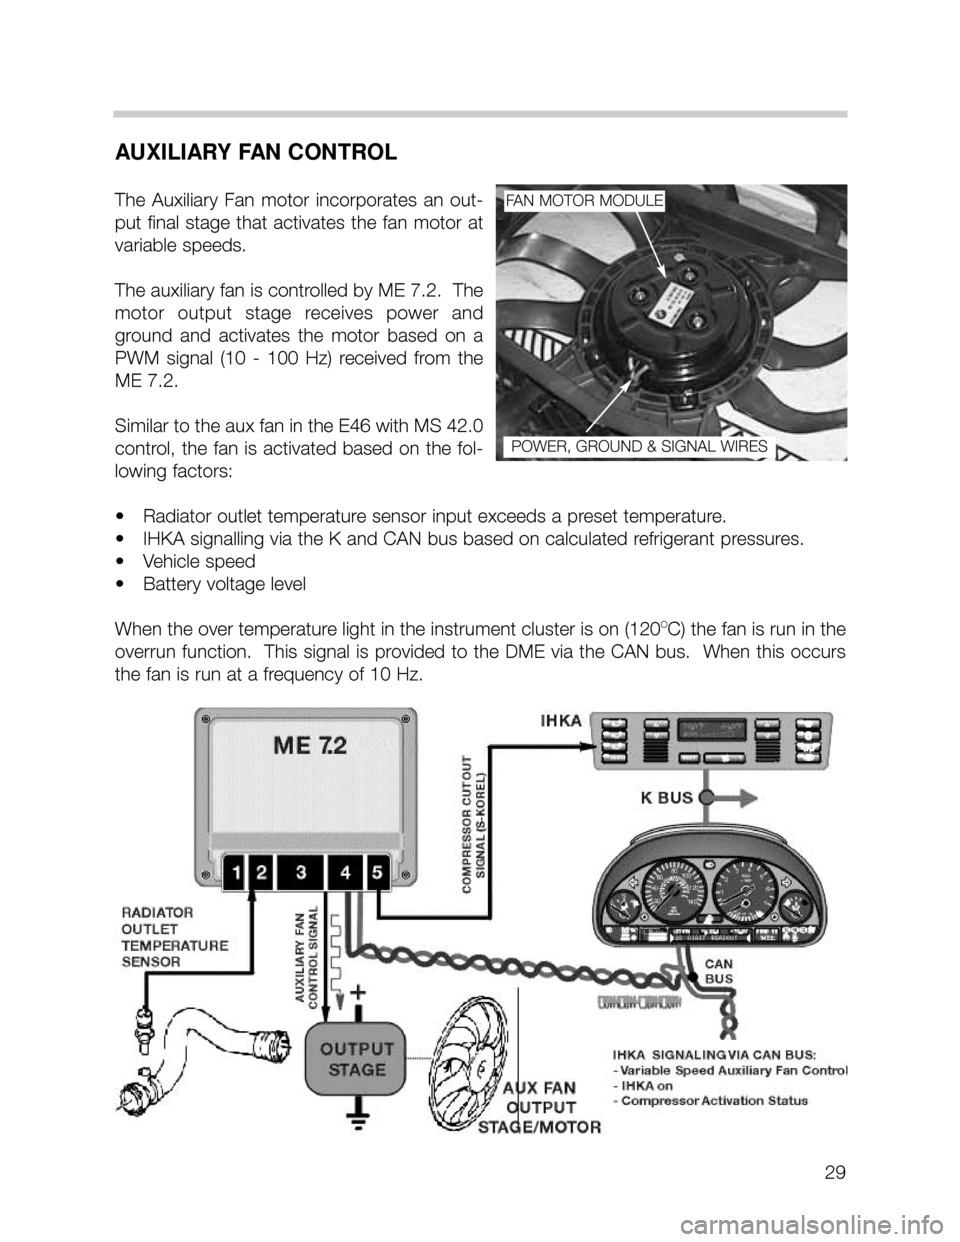 BMW 735i 2000 E38 M62TU Engine Workshop Manual 29
AUXILIARY FAN CONTROL
The  Auxiliary  Fan  motor  incorporates  an  out-
put  final  stage  that  activates  the  fan  motor  at
variable speeds.  
The auxiliary fan is controlled by ME 7.2.  The
m